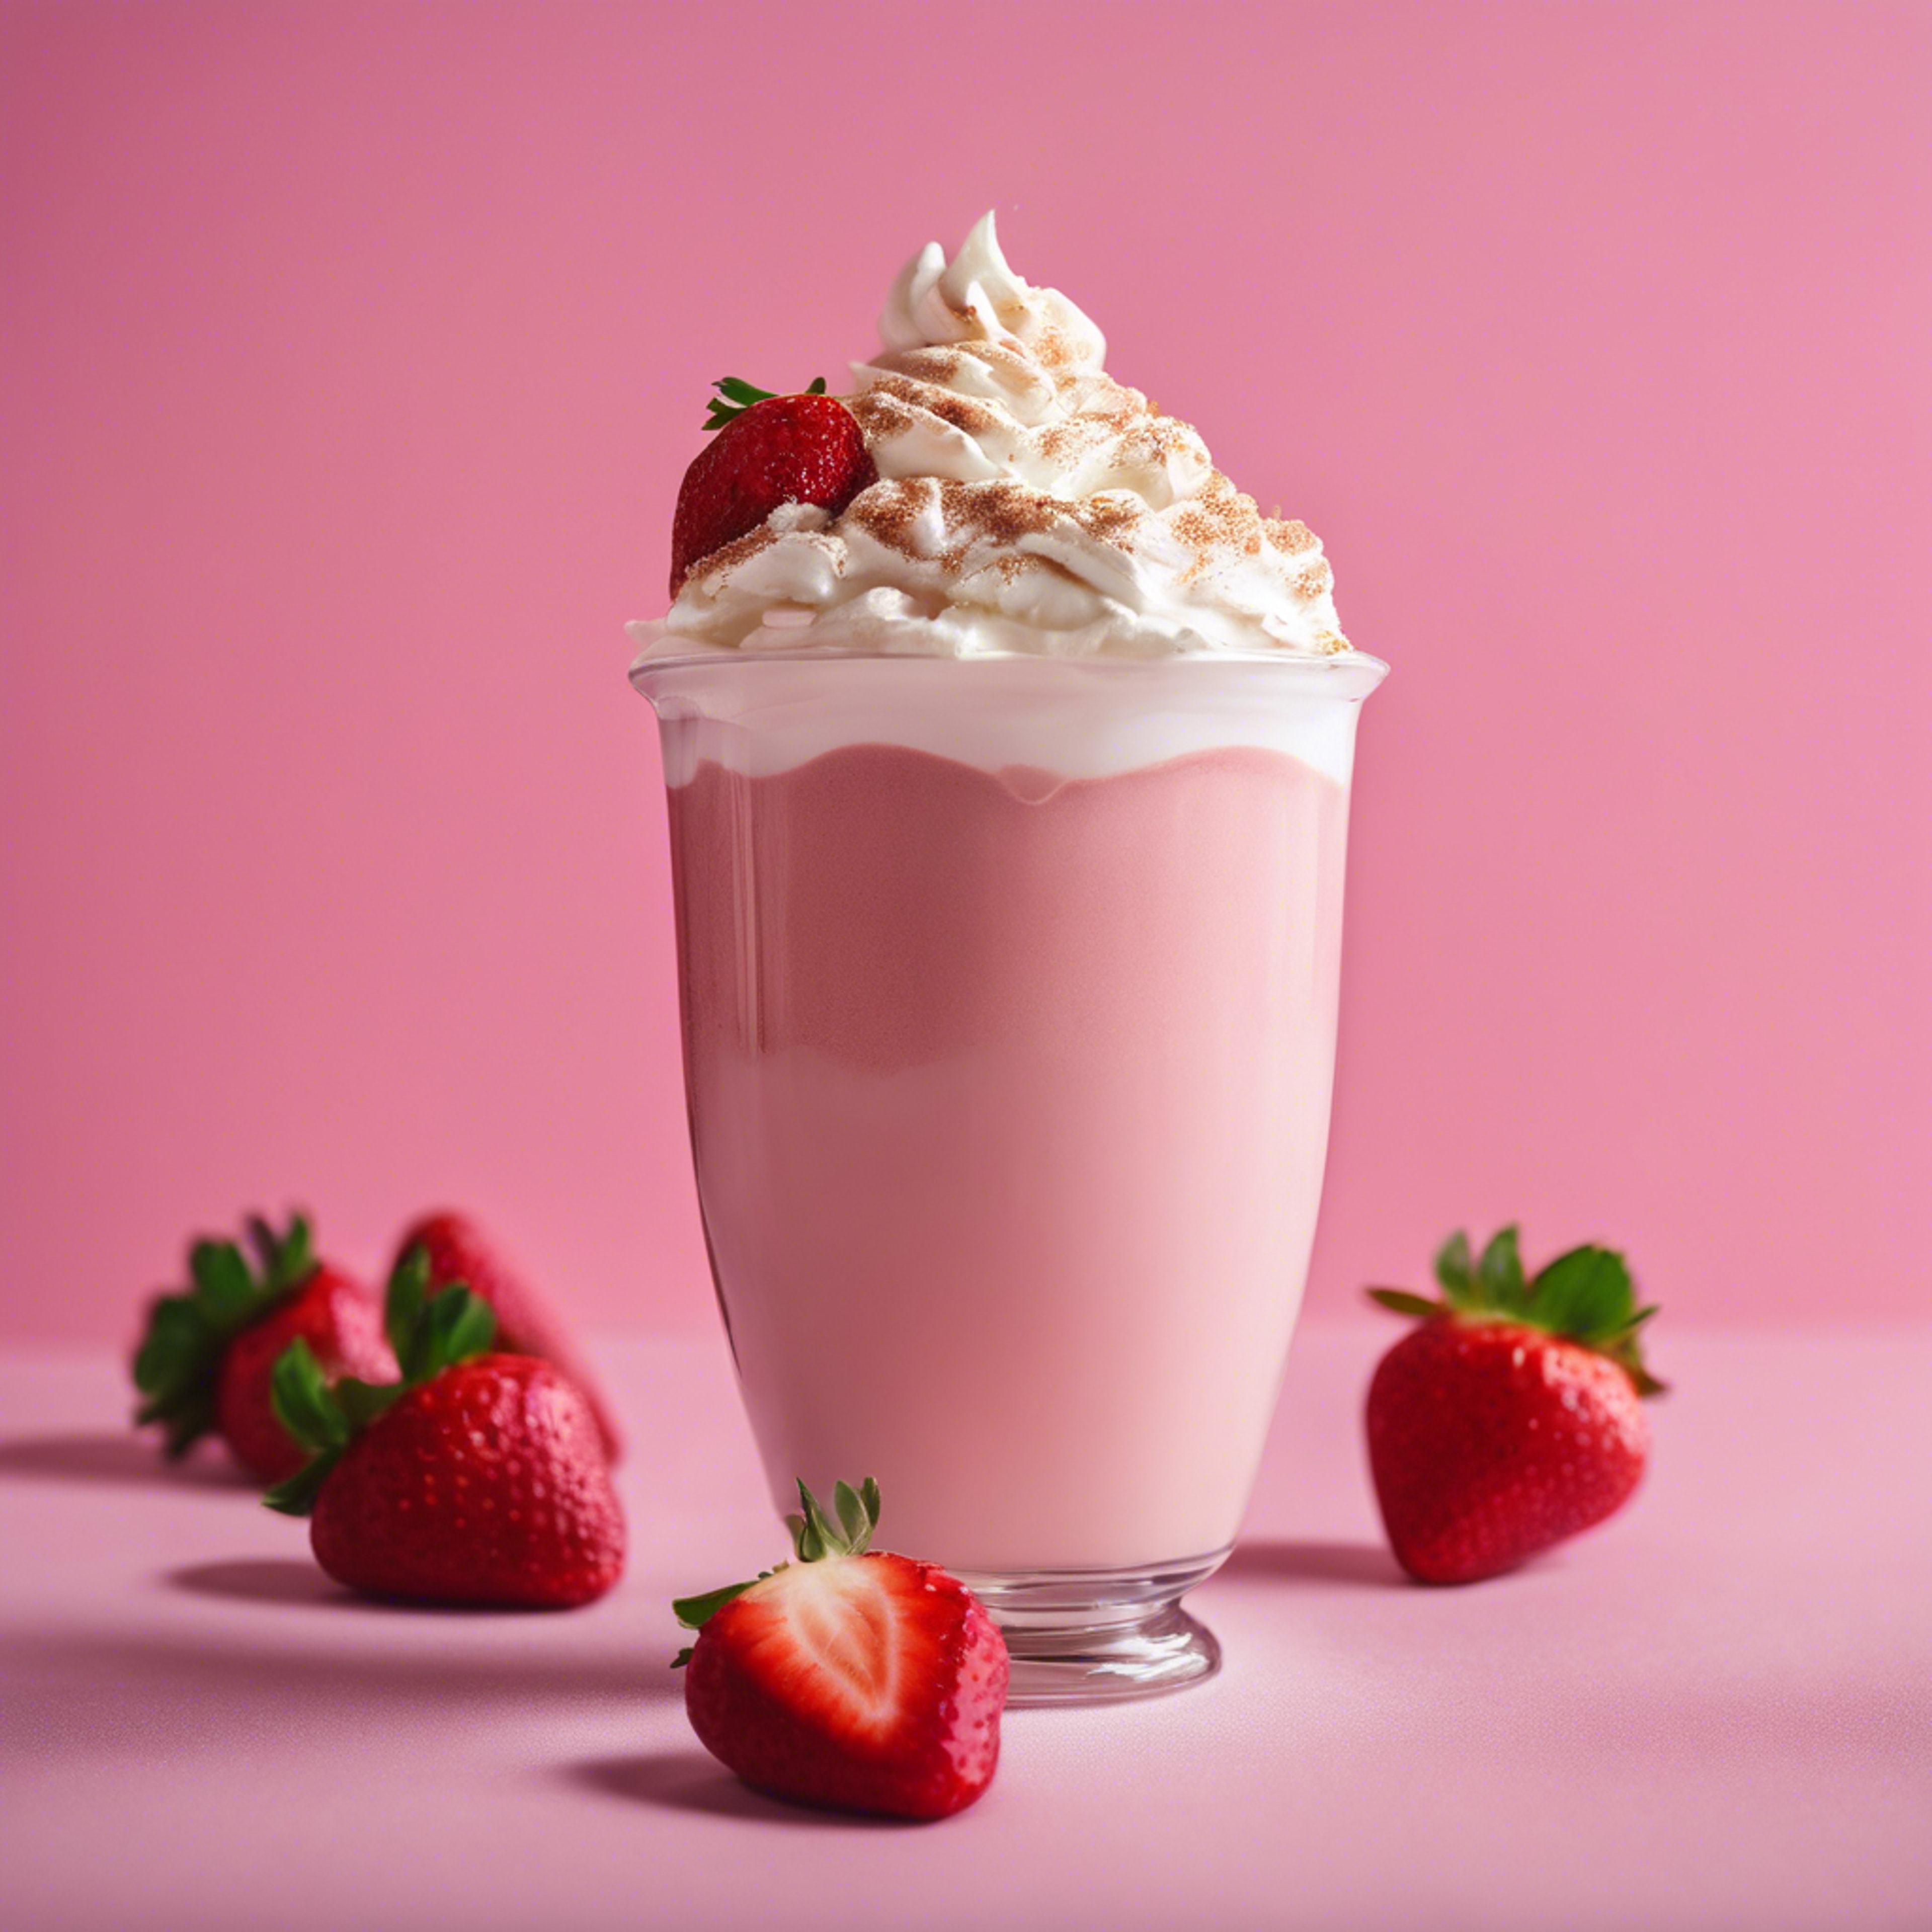 A freshly brewed strawberry latte with whipped cream against a pink backdrop. ផ្ទាំង​រូបភាព[f1420ed34c924526b0ea]